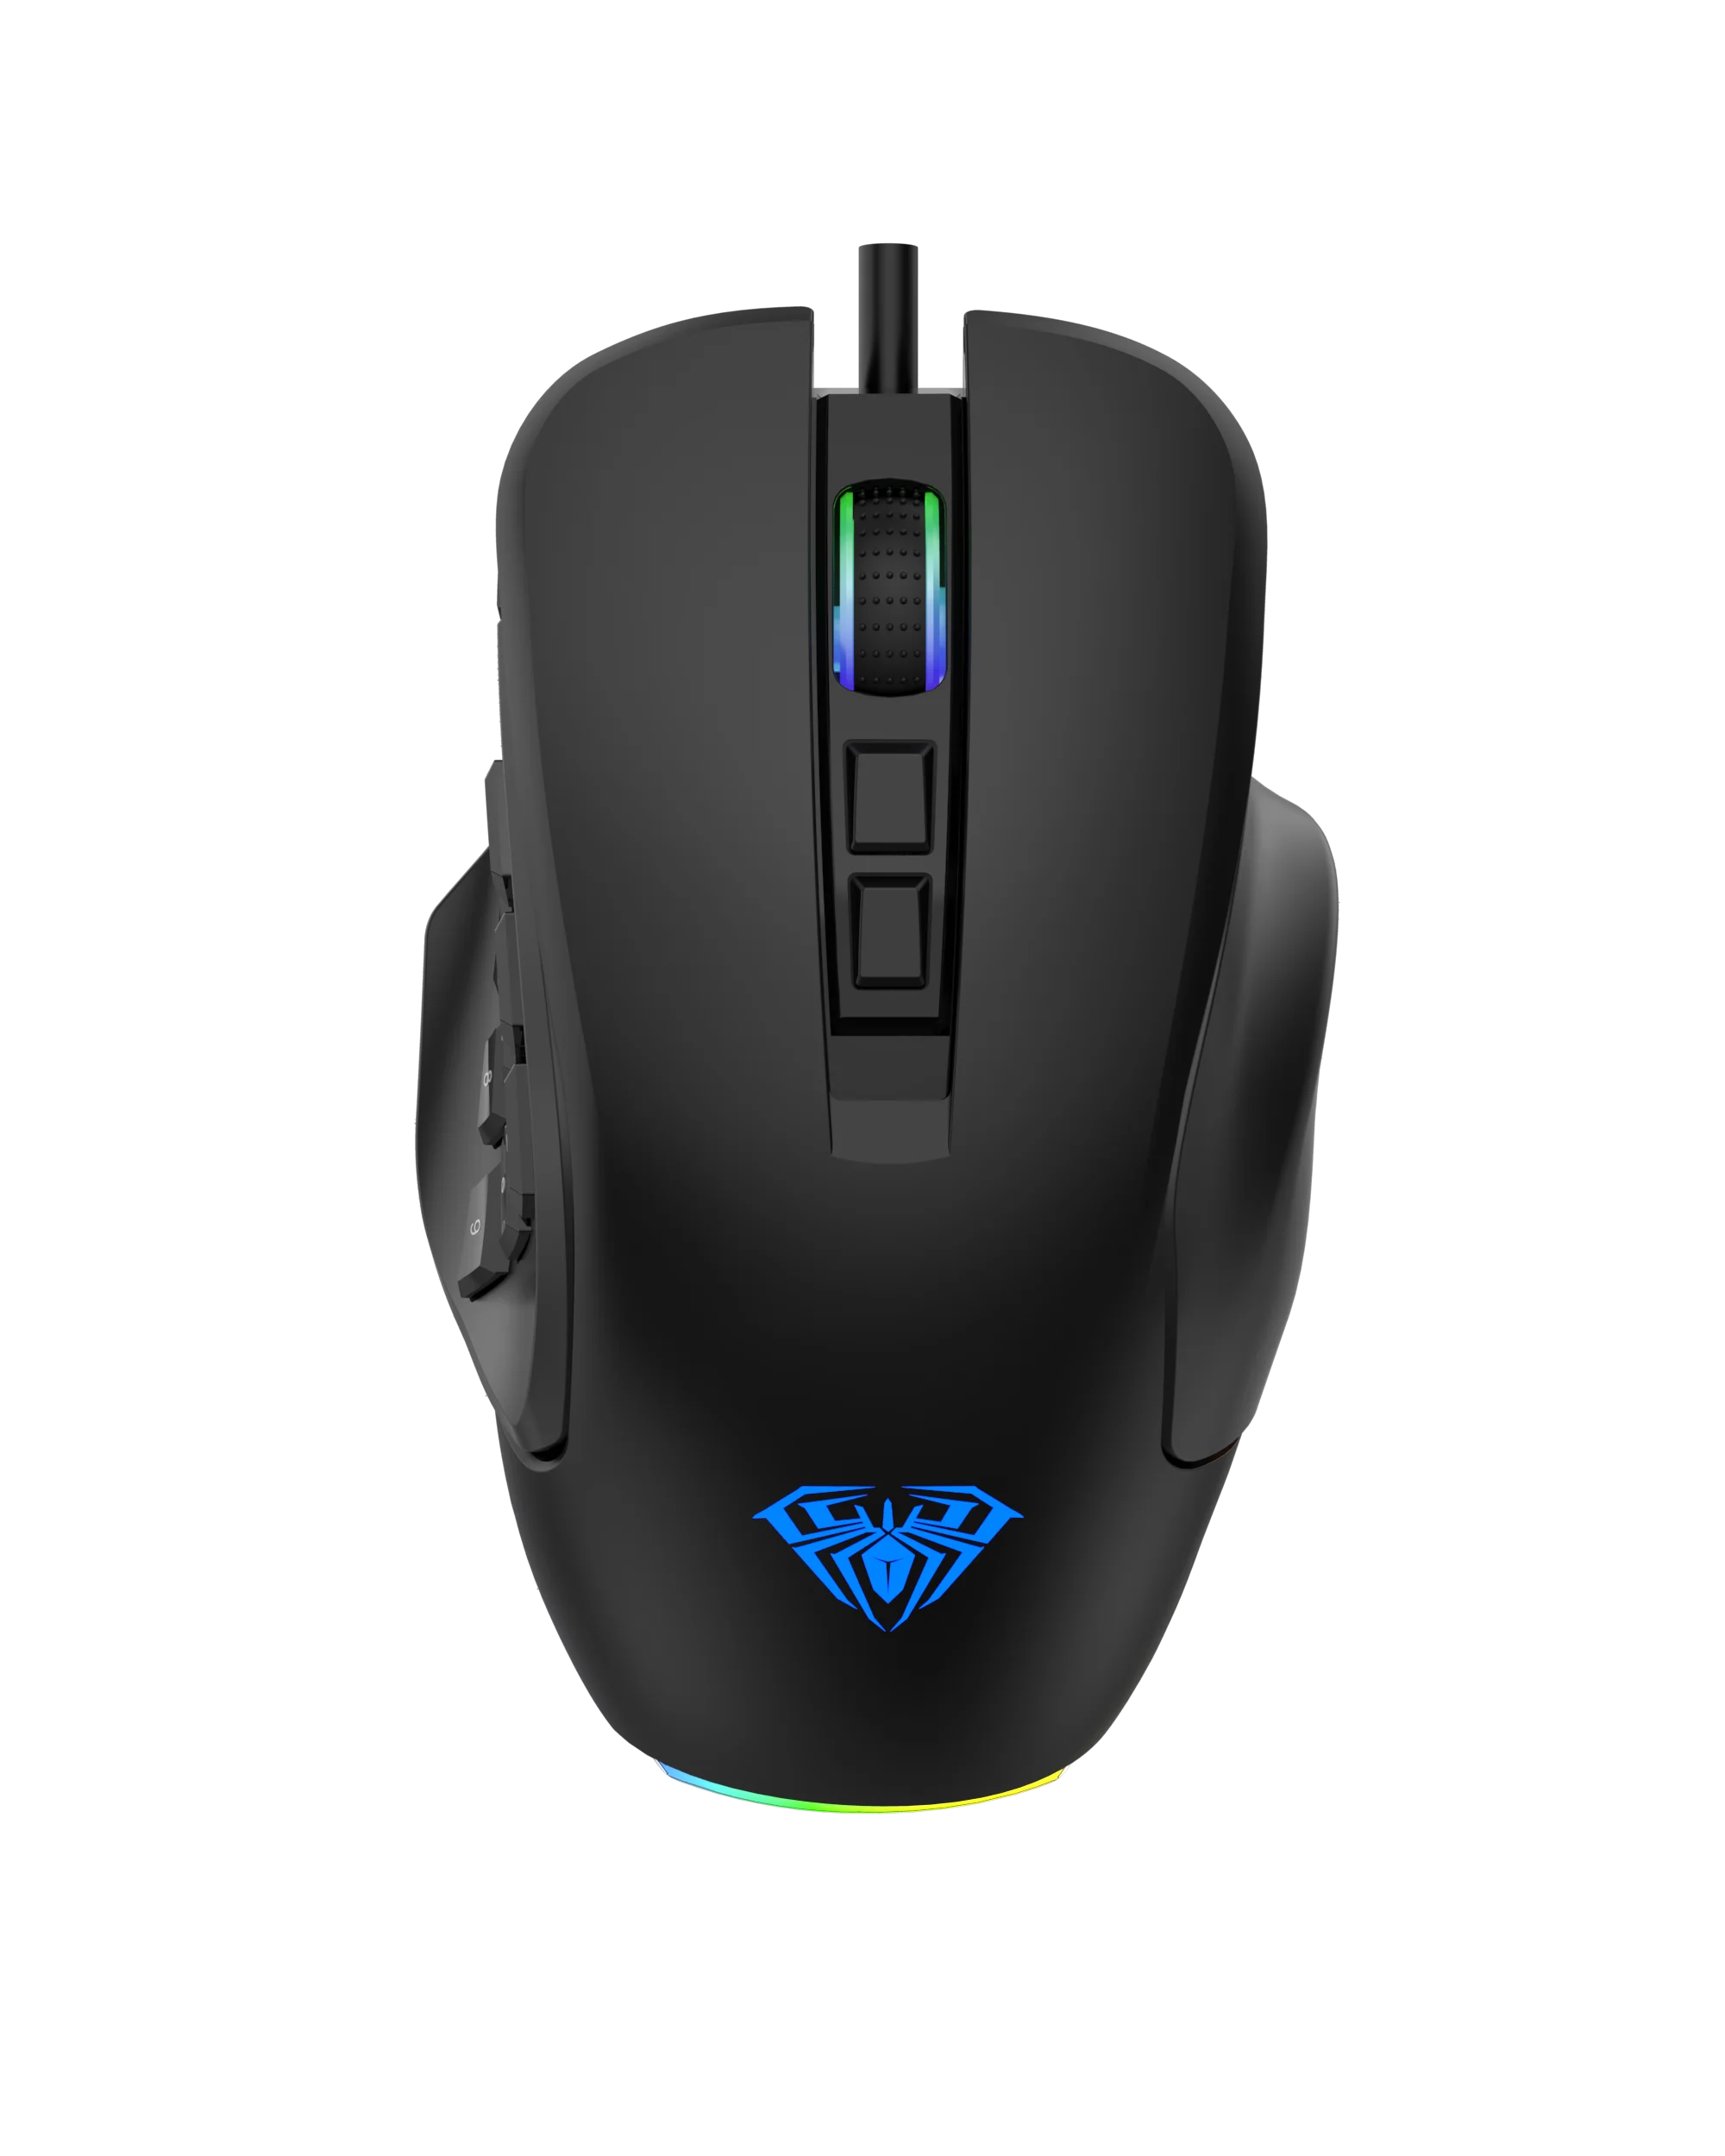 how to change mouse color on aula gaming mouse